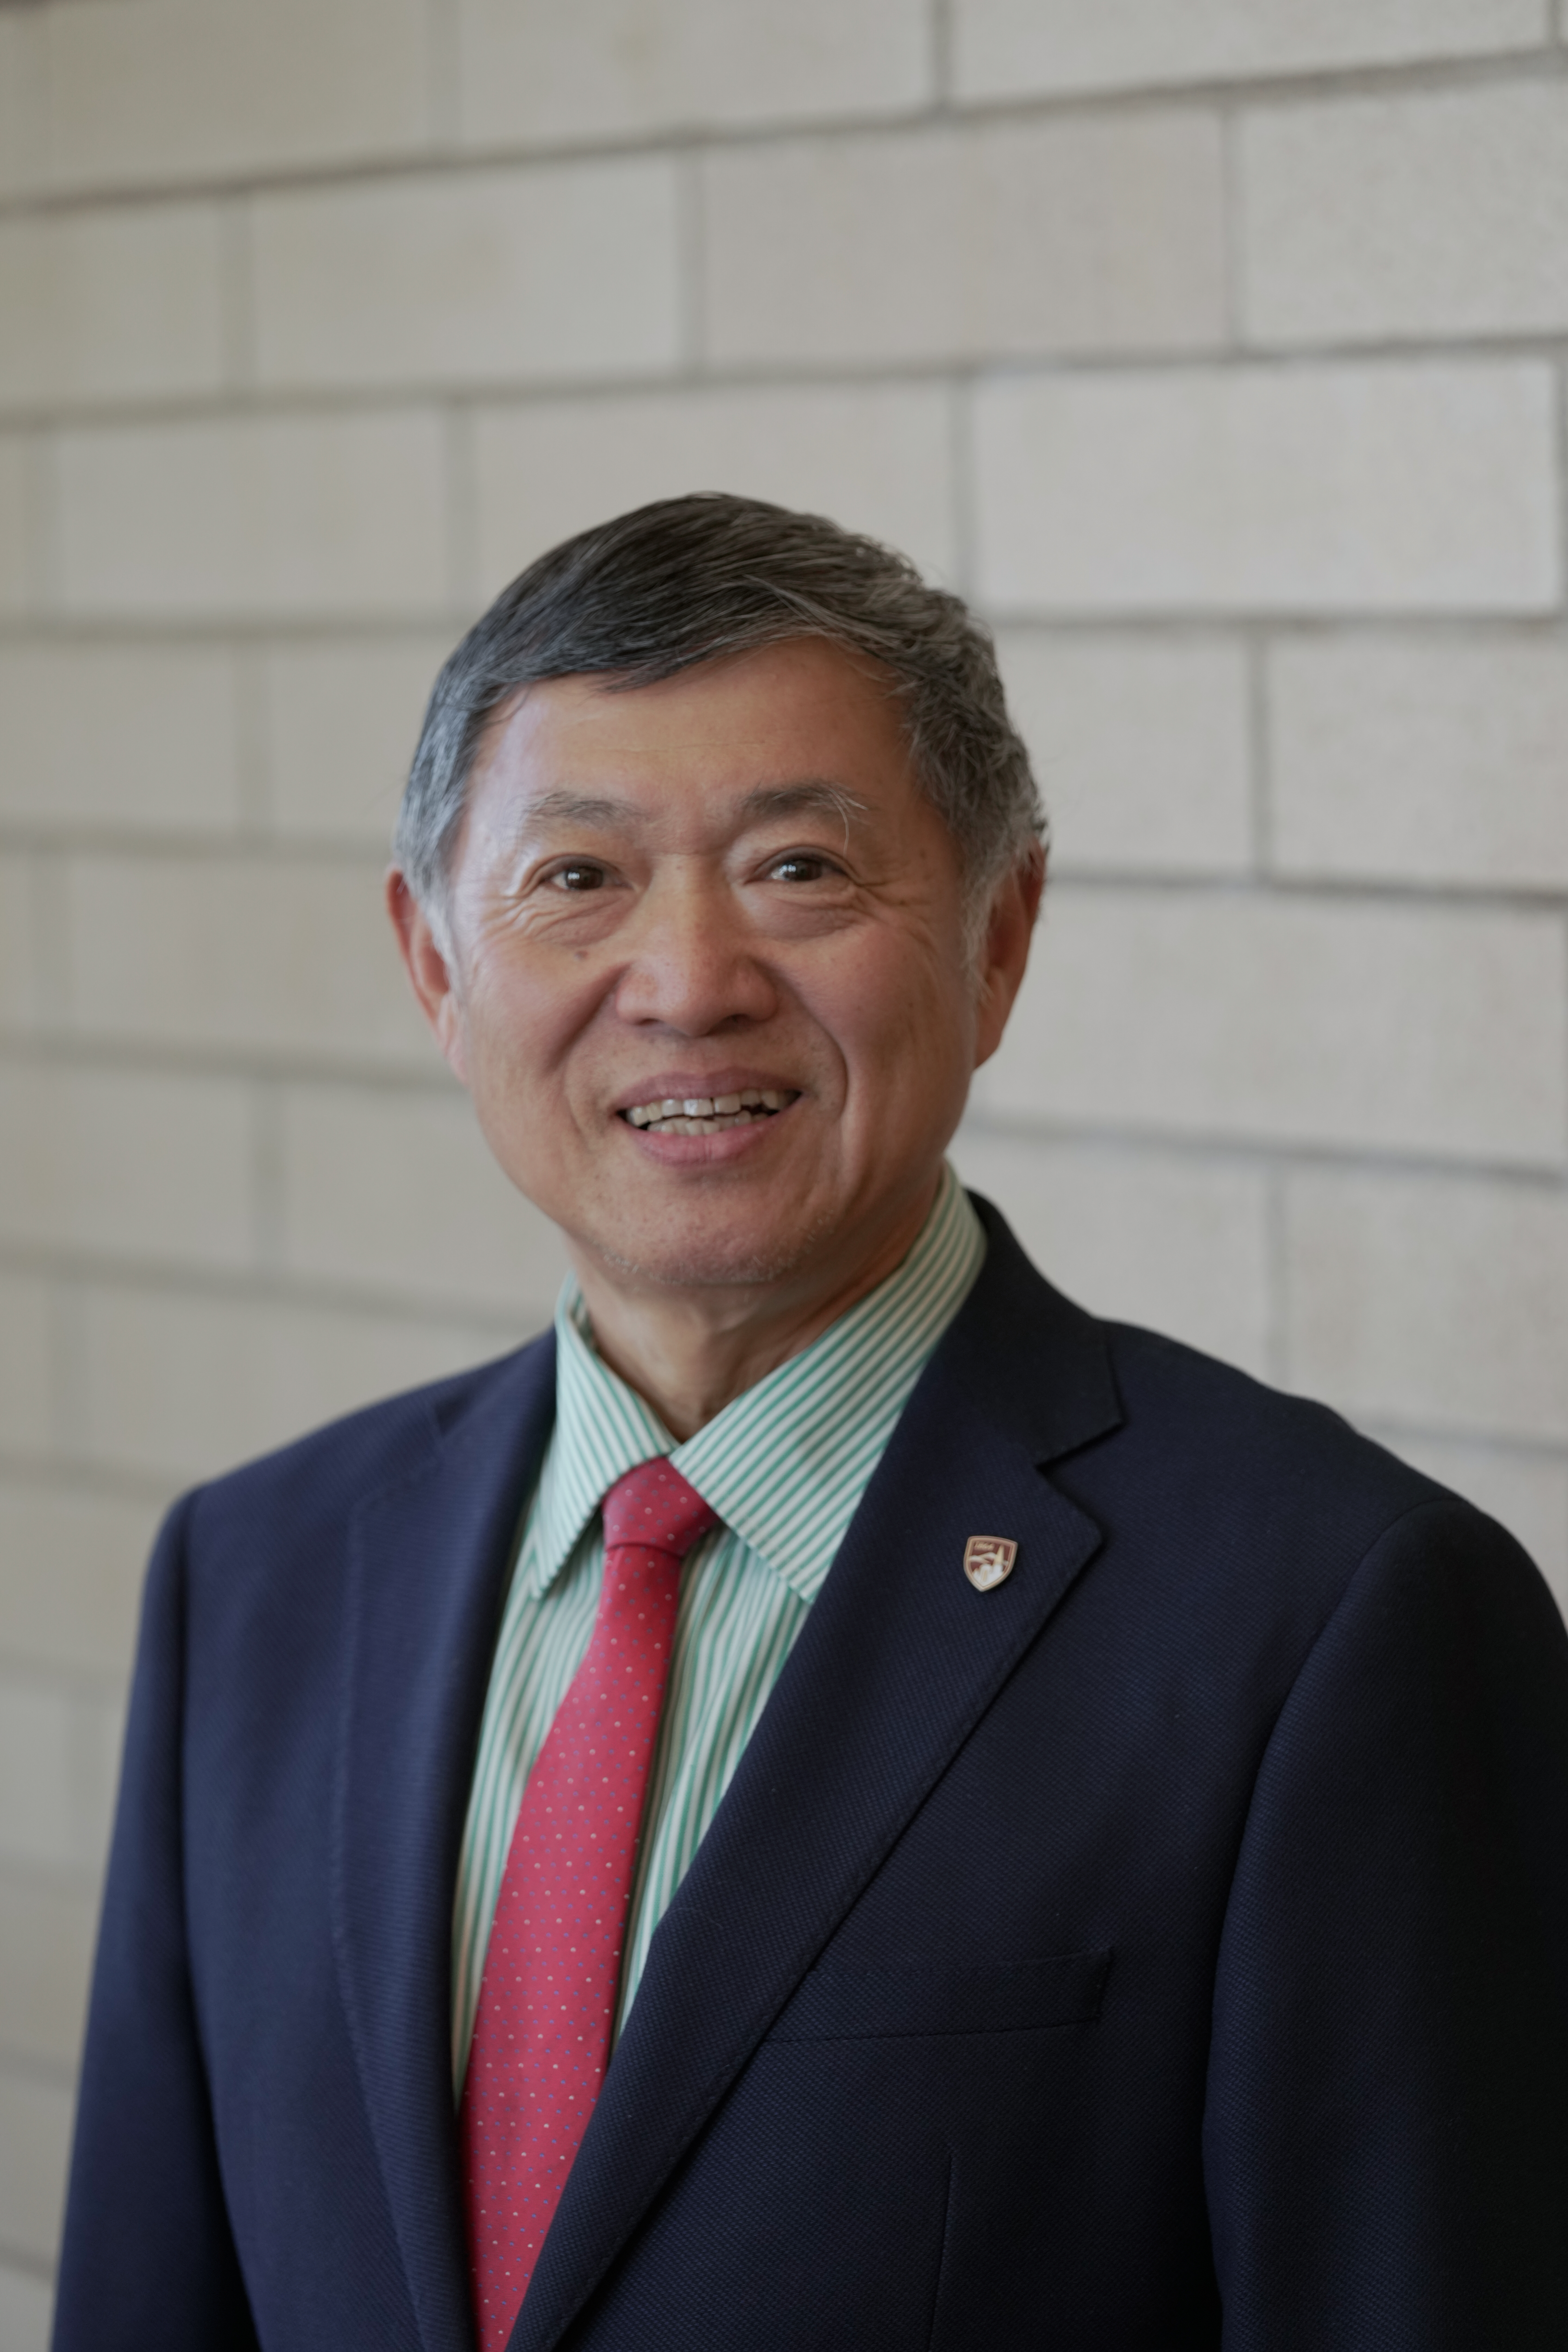 Professor Suisheng ZHAO, Editor of Journal of Contemporary China (JCC) and Director of Center for China-US Cooperation, Josef Korbel School of International Studies, University of Denver